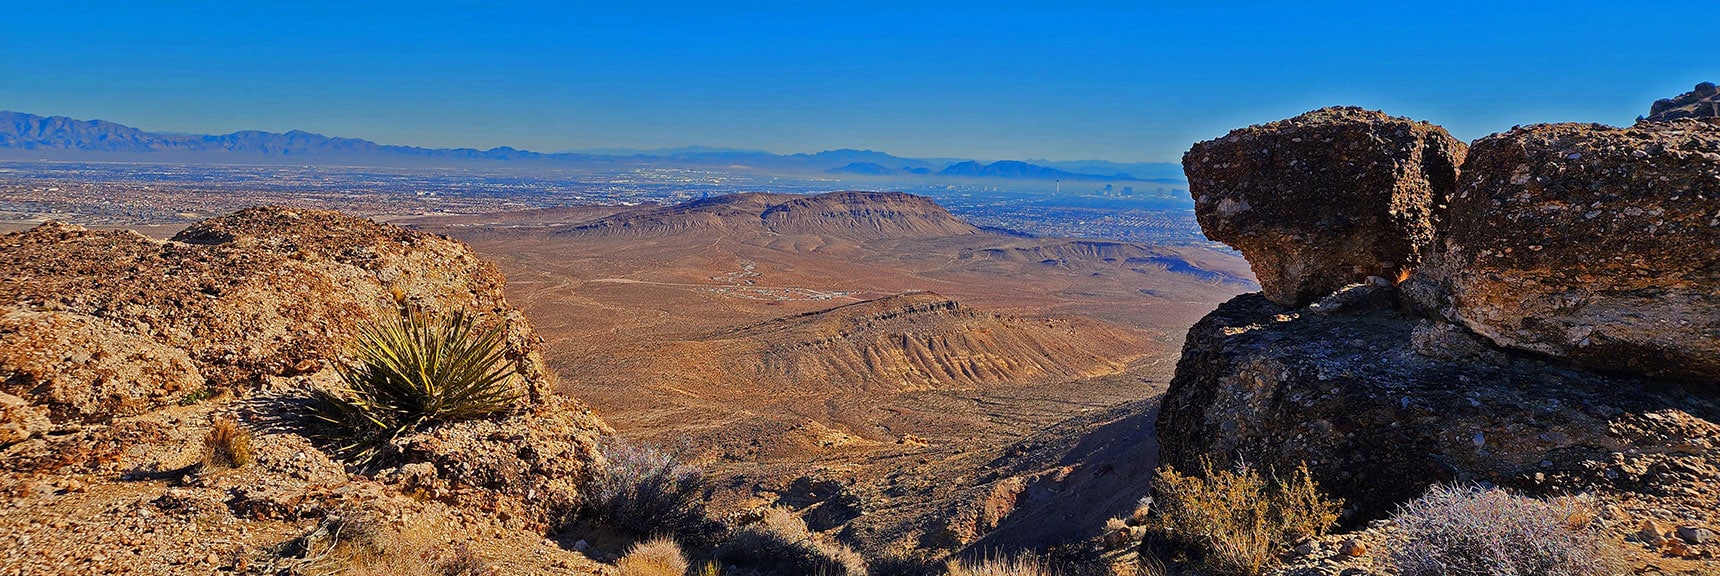 View East to Red Rock Campground, Las Vegas Valley and Beyond | Eastern Outer Circuit | Blue Diamond Hill | Red Rock Canyon, Nevada